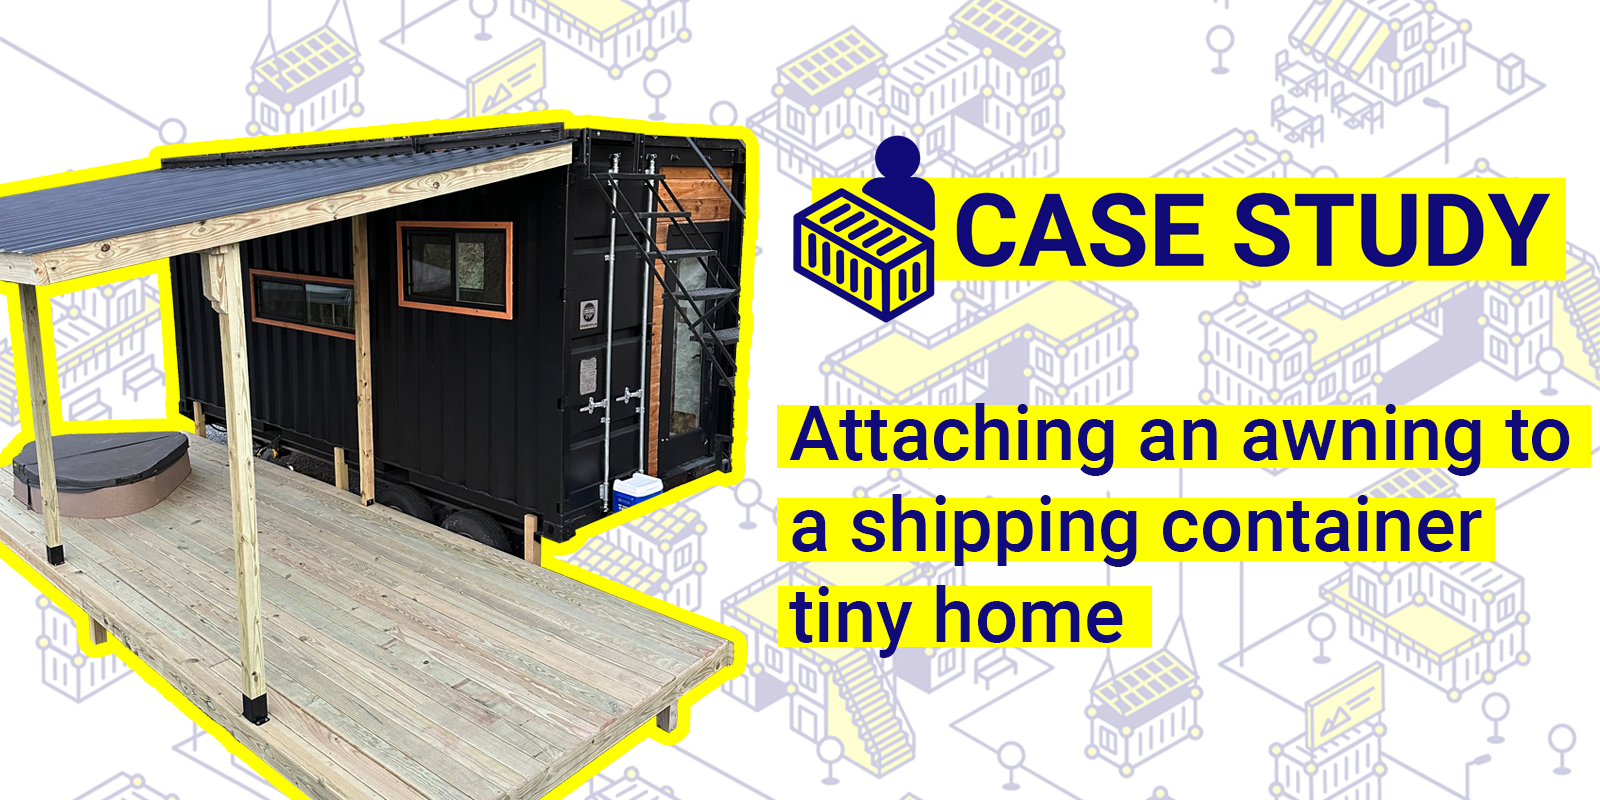 Attaching an awning to a shipping container tiny home